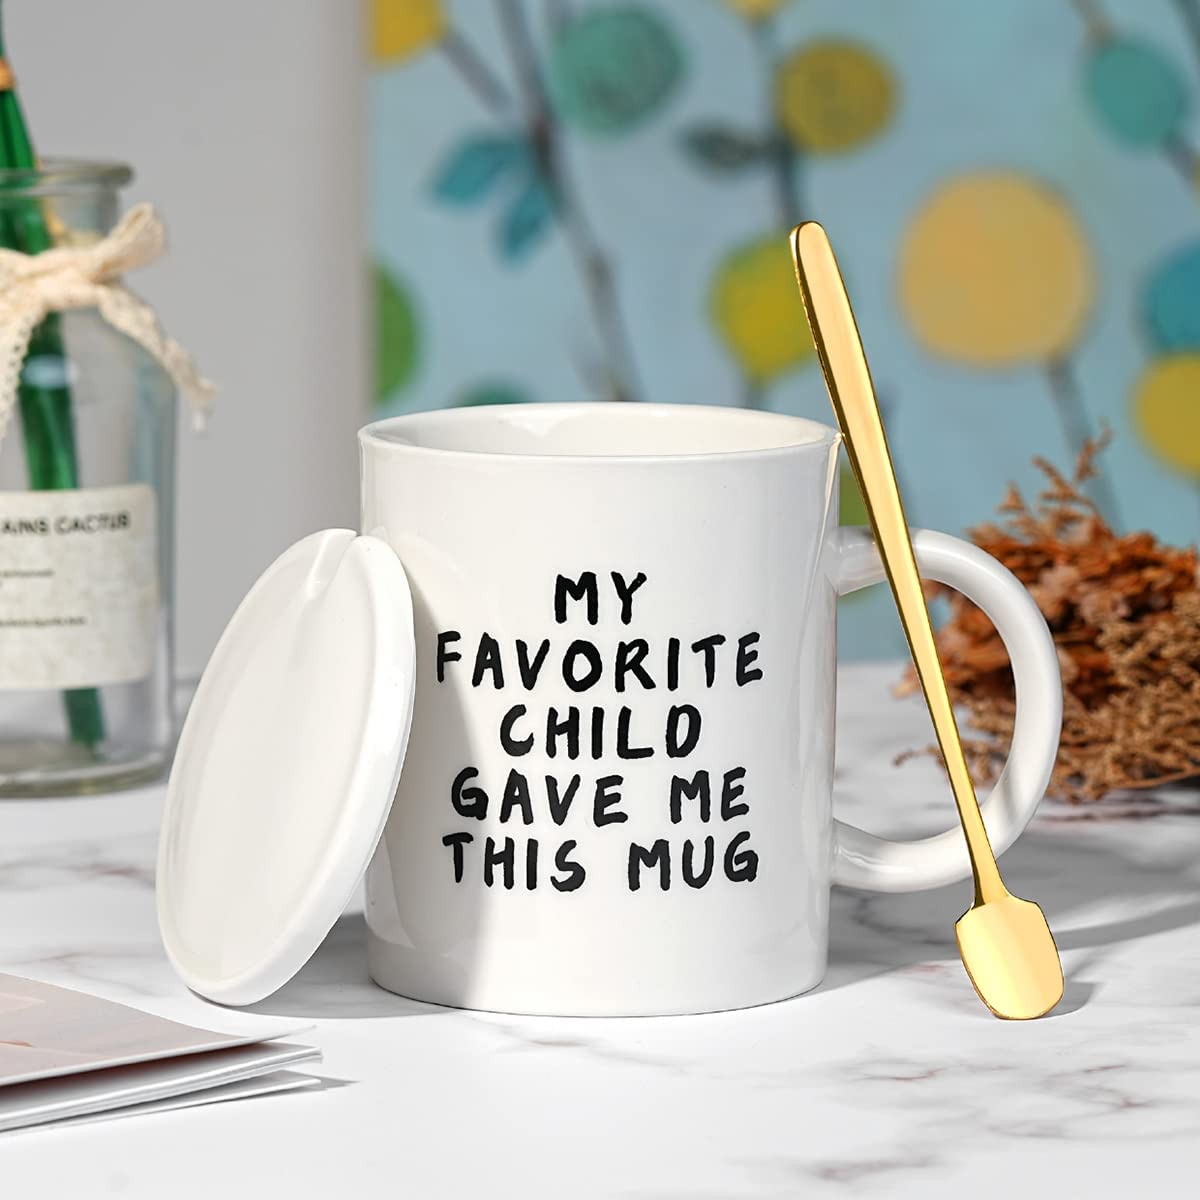 Gift Guide: Fun gifts for mom, dad or the in-laws! — christie ferrari